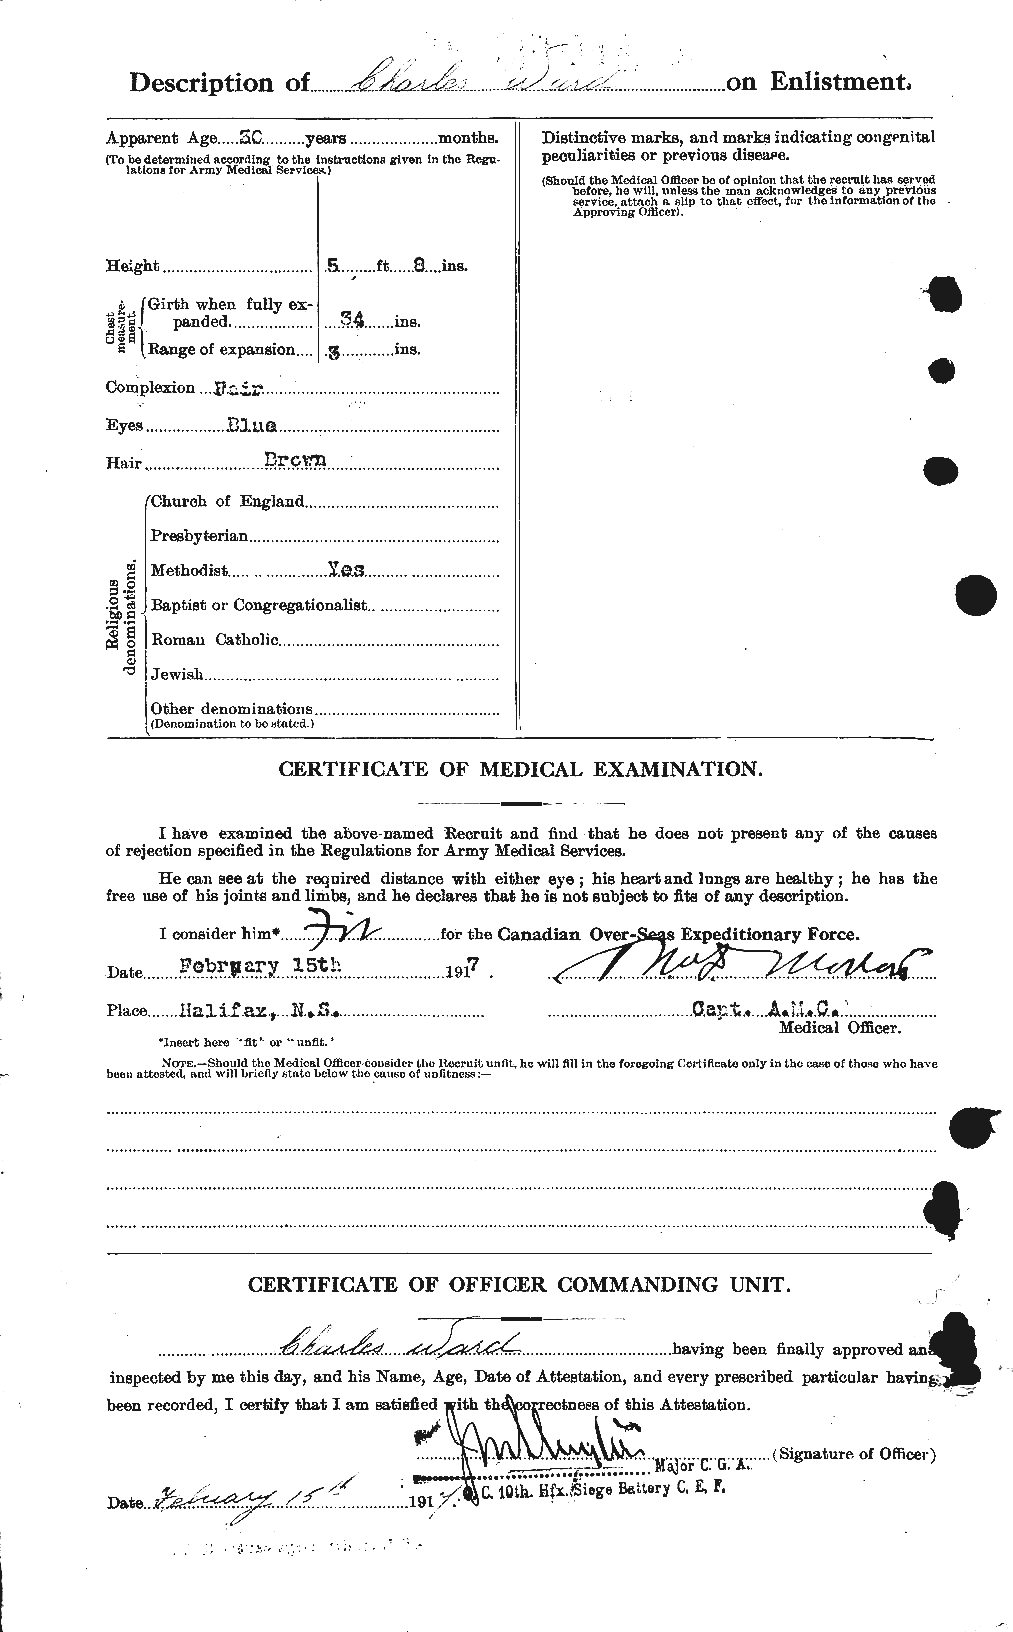 Personnel Records of the First World War - CEF 657569b